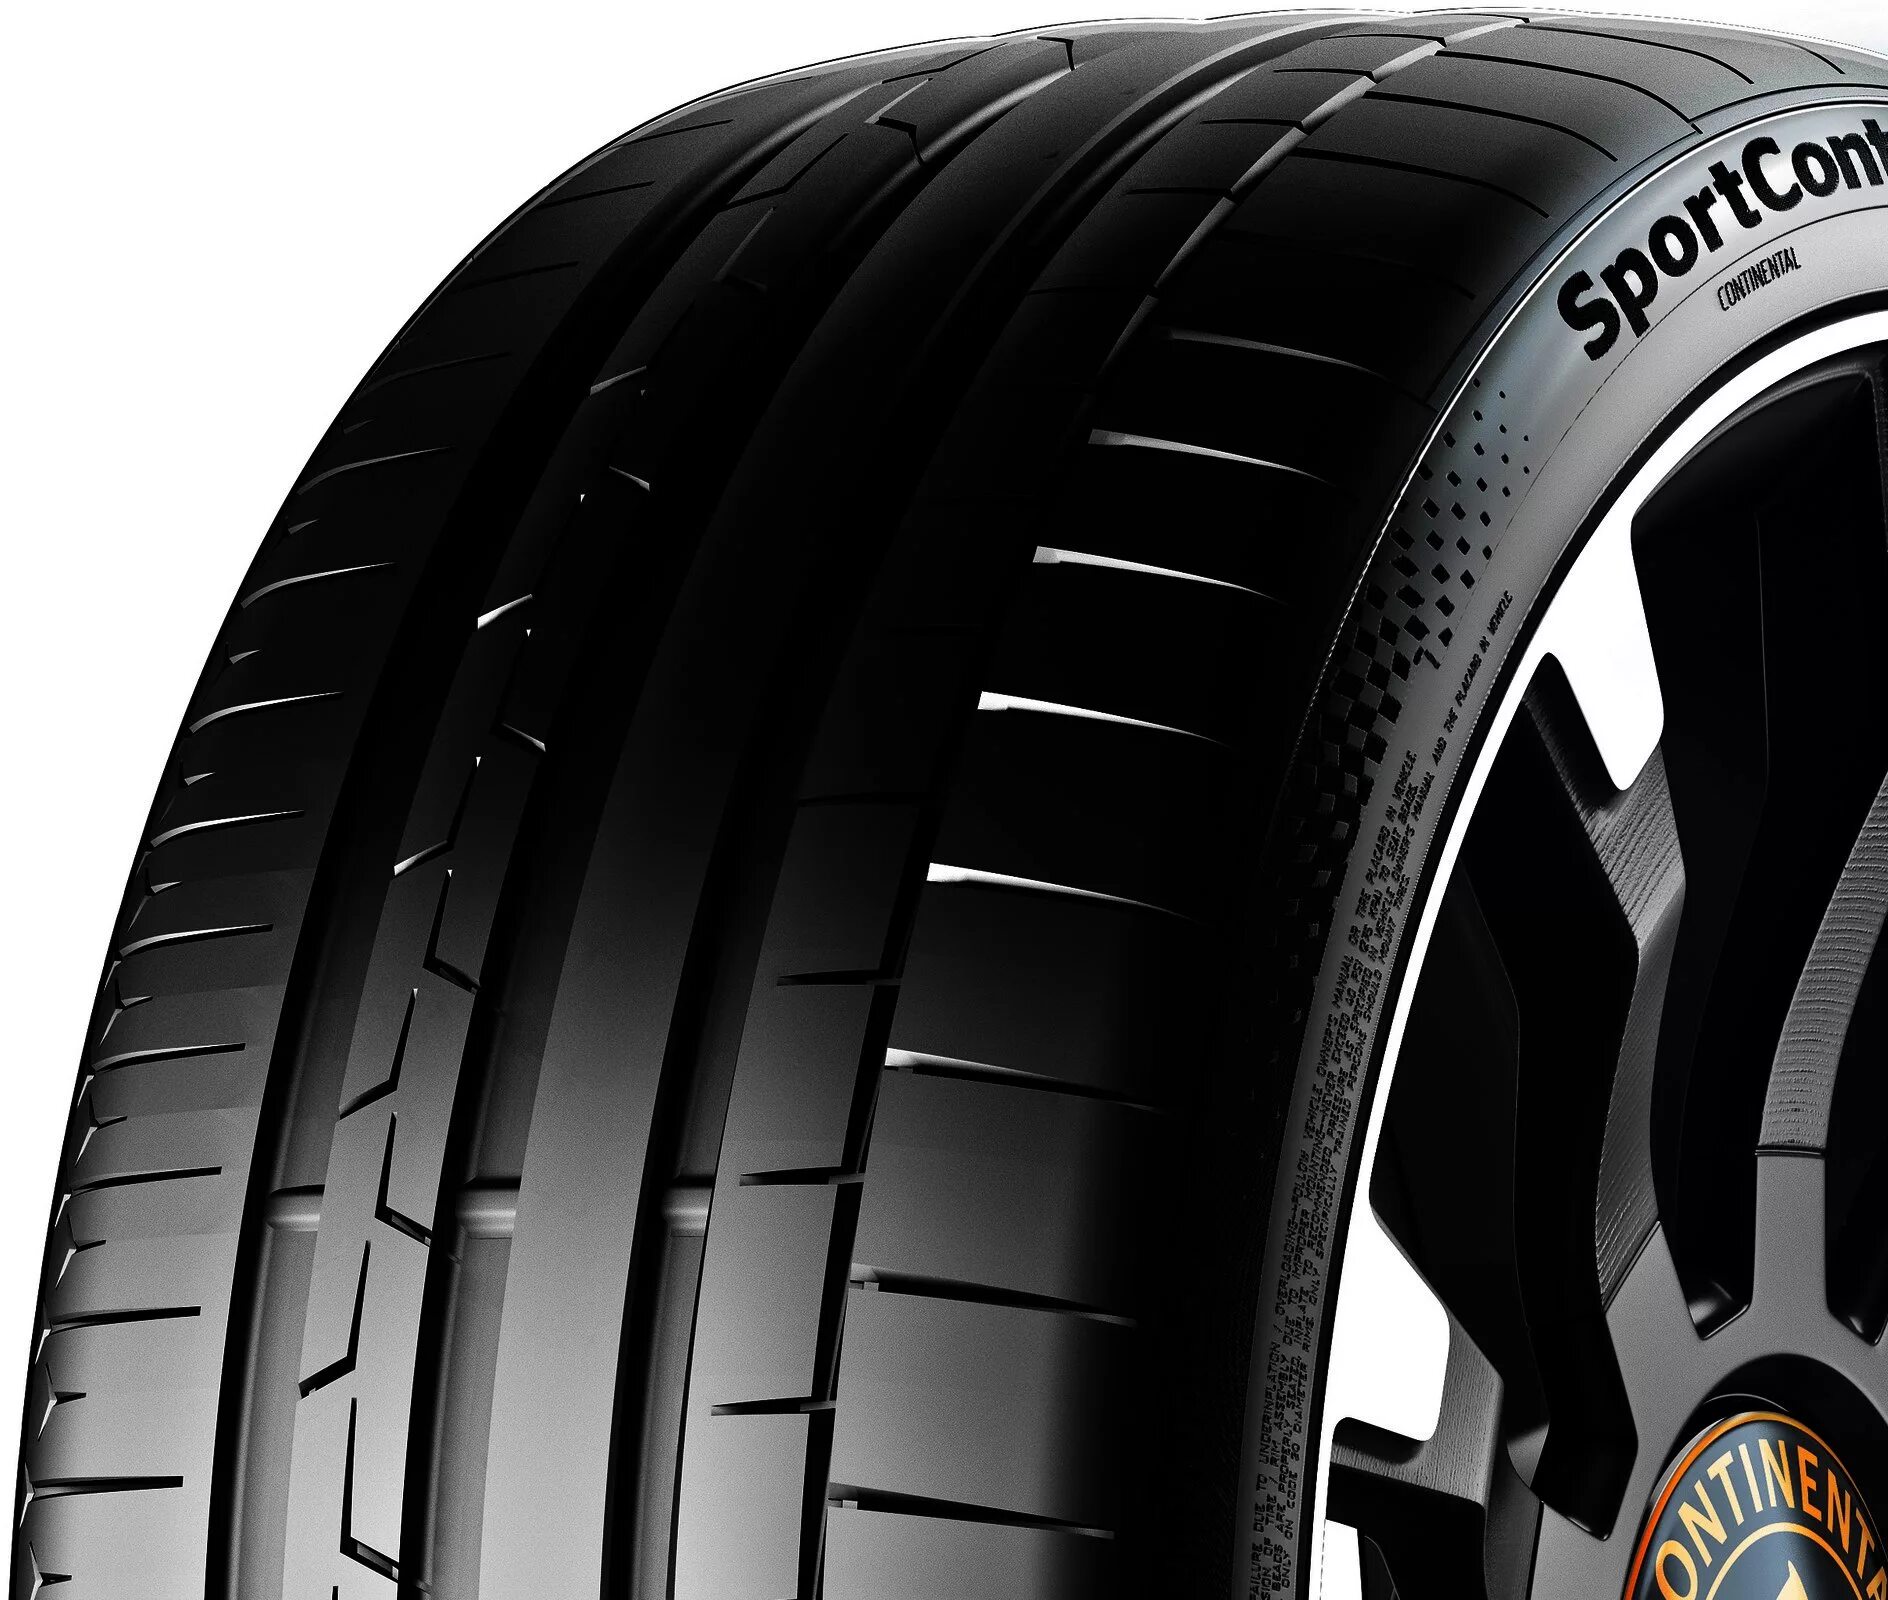 Continental CONTISPORTCONTACT 6. Continental SPORTCONTACT 6. Continental CONTIPREMIUMCONTACT 6 325/40 r22. Continental SPORTCONTACT 6 225 40 255 35. Michelin pilot sport r22